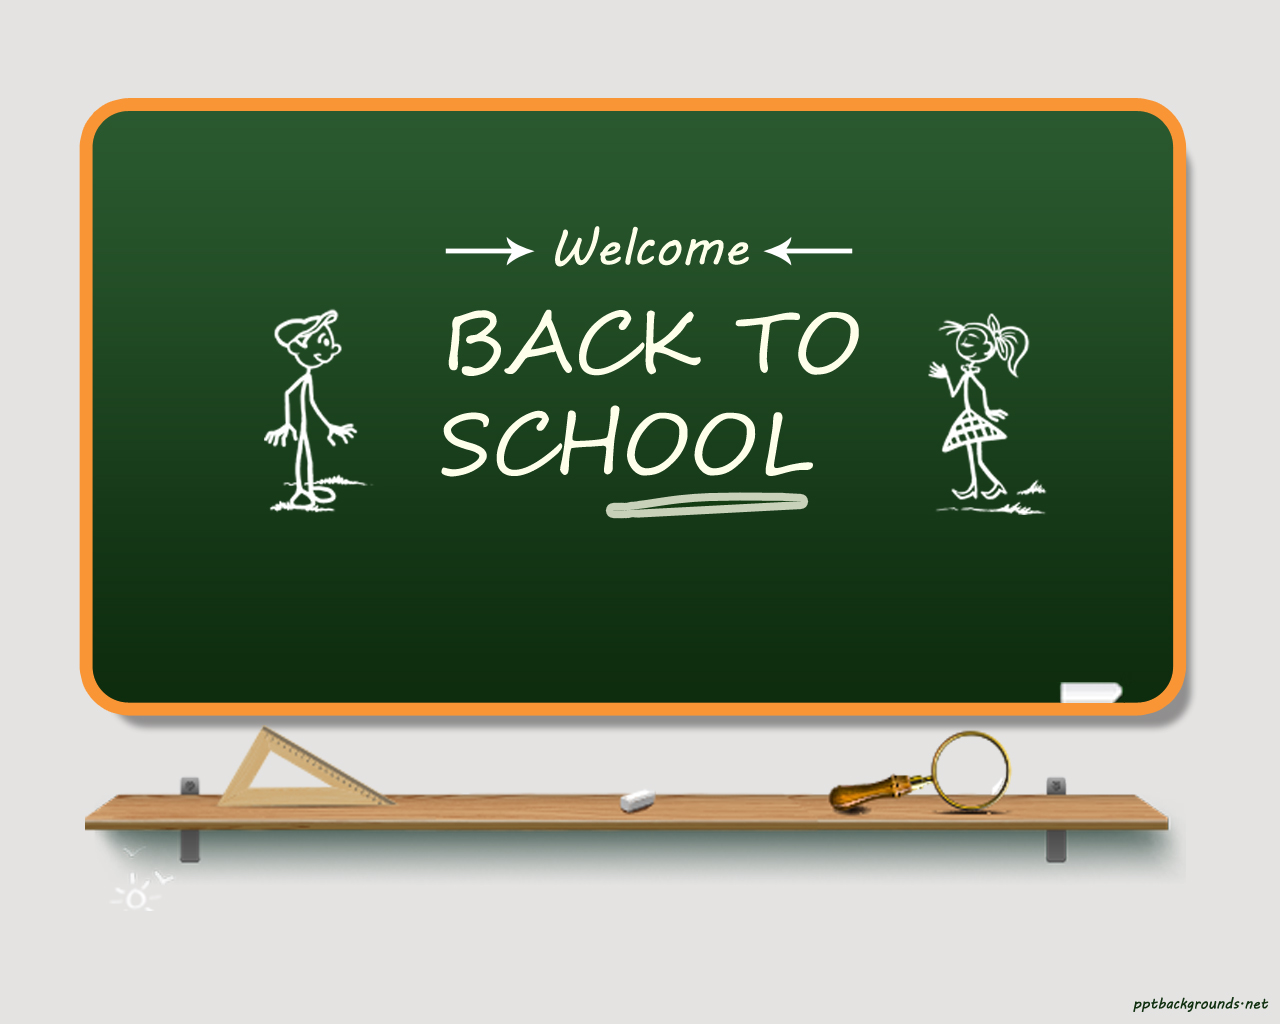 Back To School 11 - 11 Background For PowerPoint - Education Inside Back To School Powerpoint Template